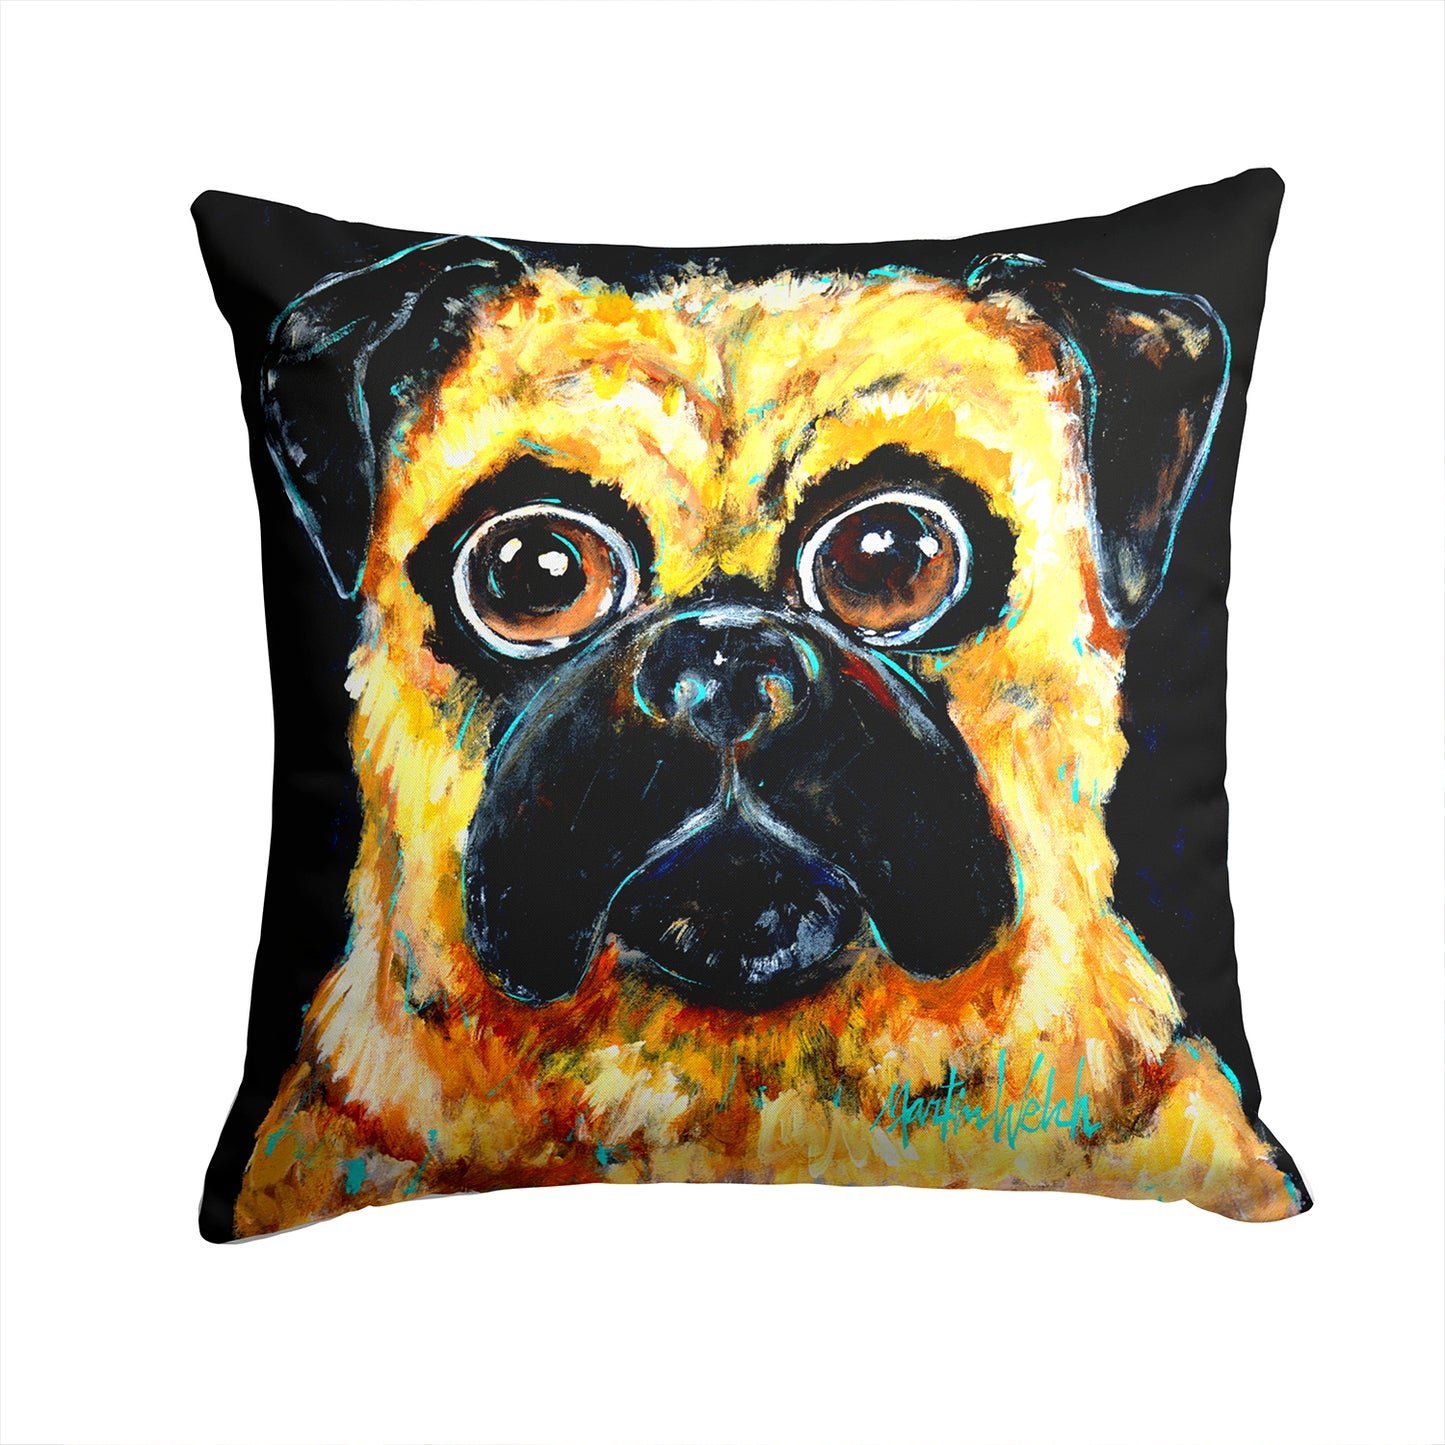 Buy this Pug It Out Fabric Decorative Pillow